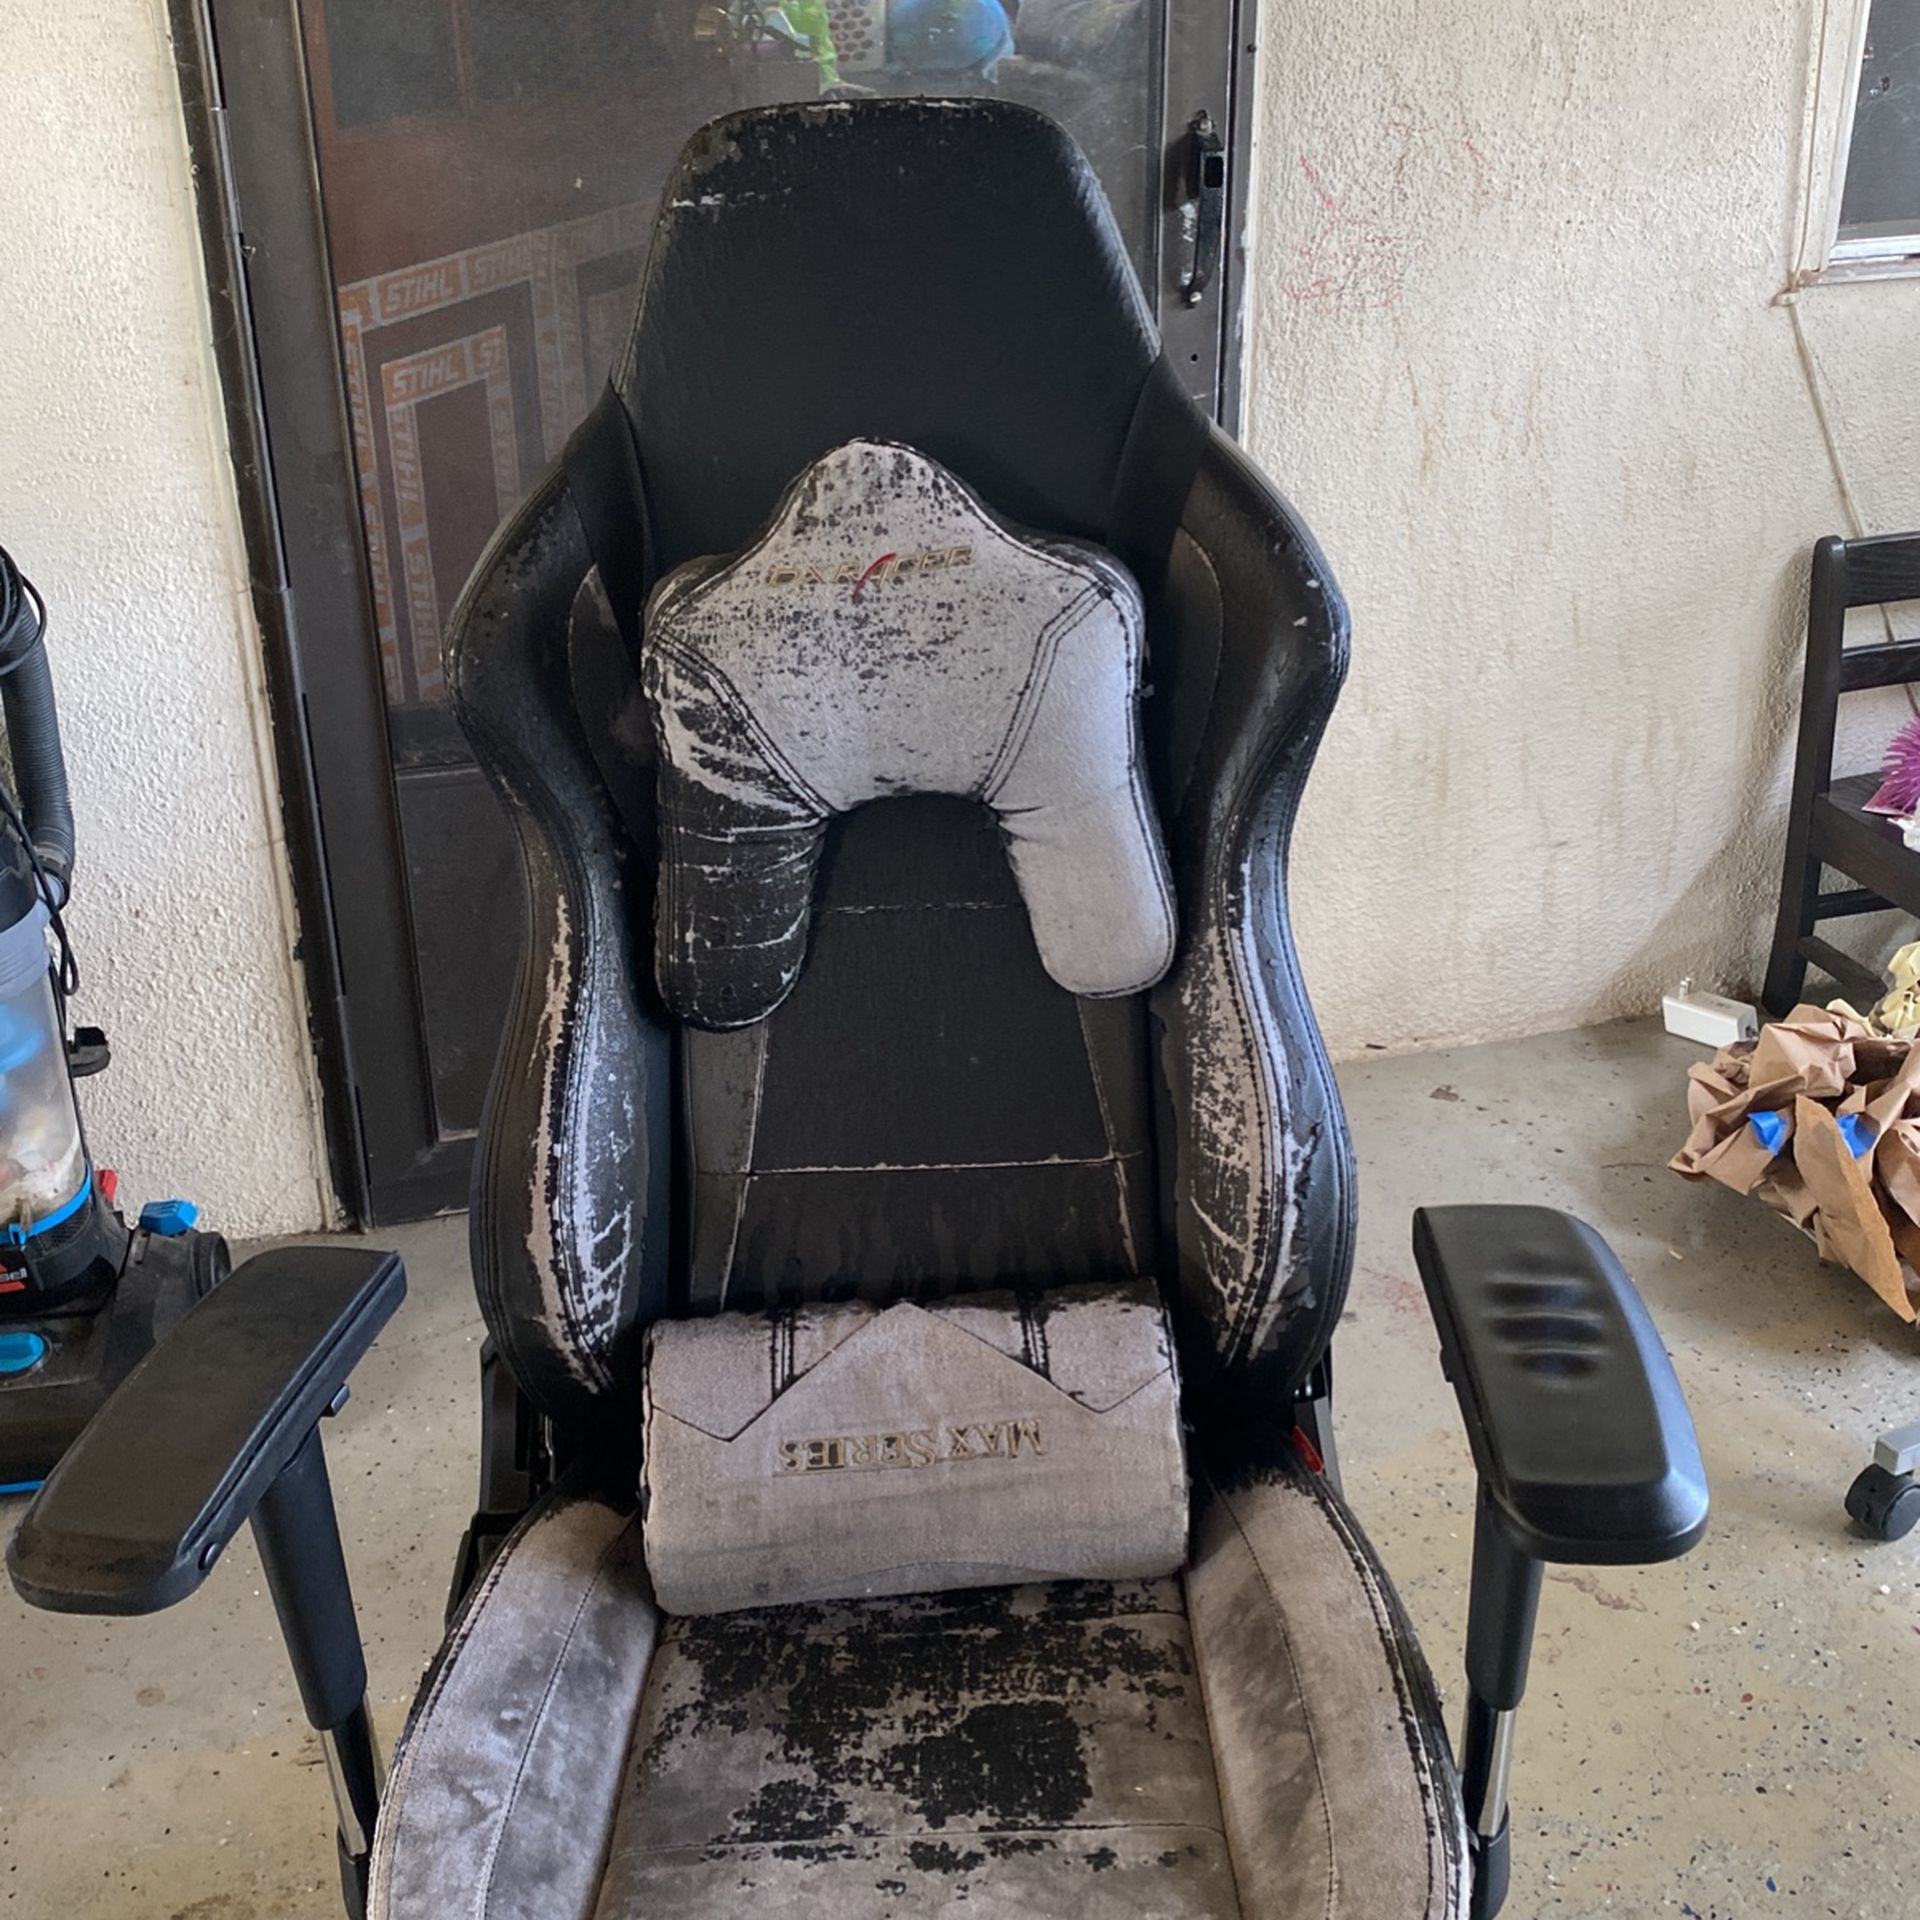 DX RACER Gaming Chair